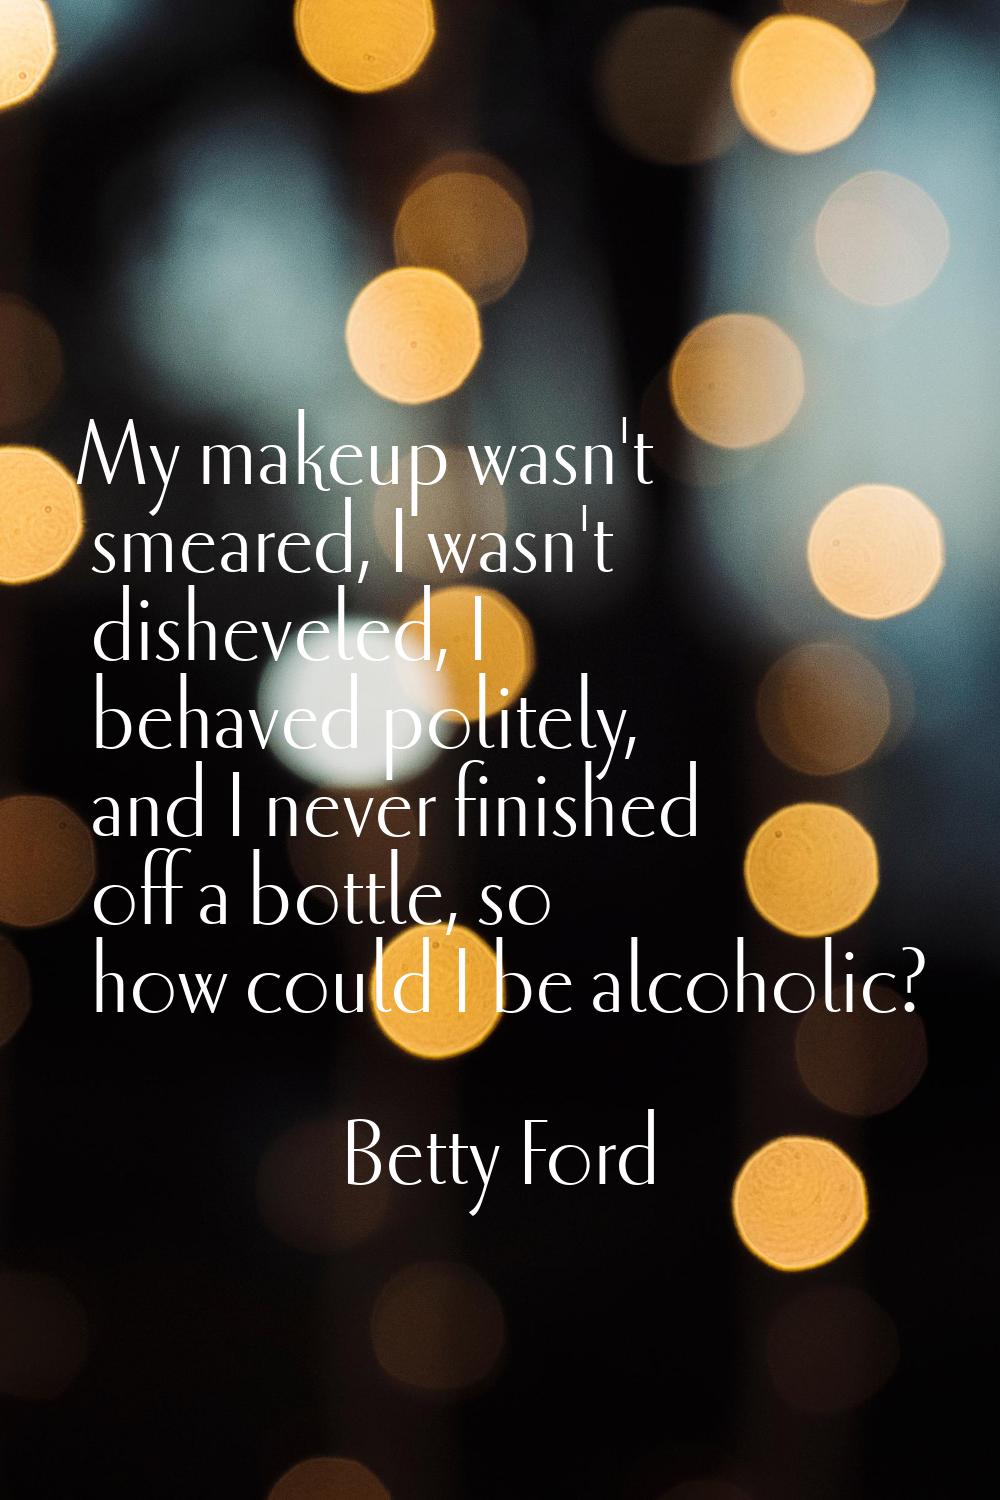 My makeup wasn't smeared, I wasn't disheveled, I behaved politely, and I never finished off a bottl